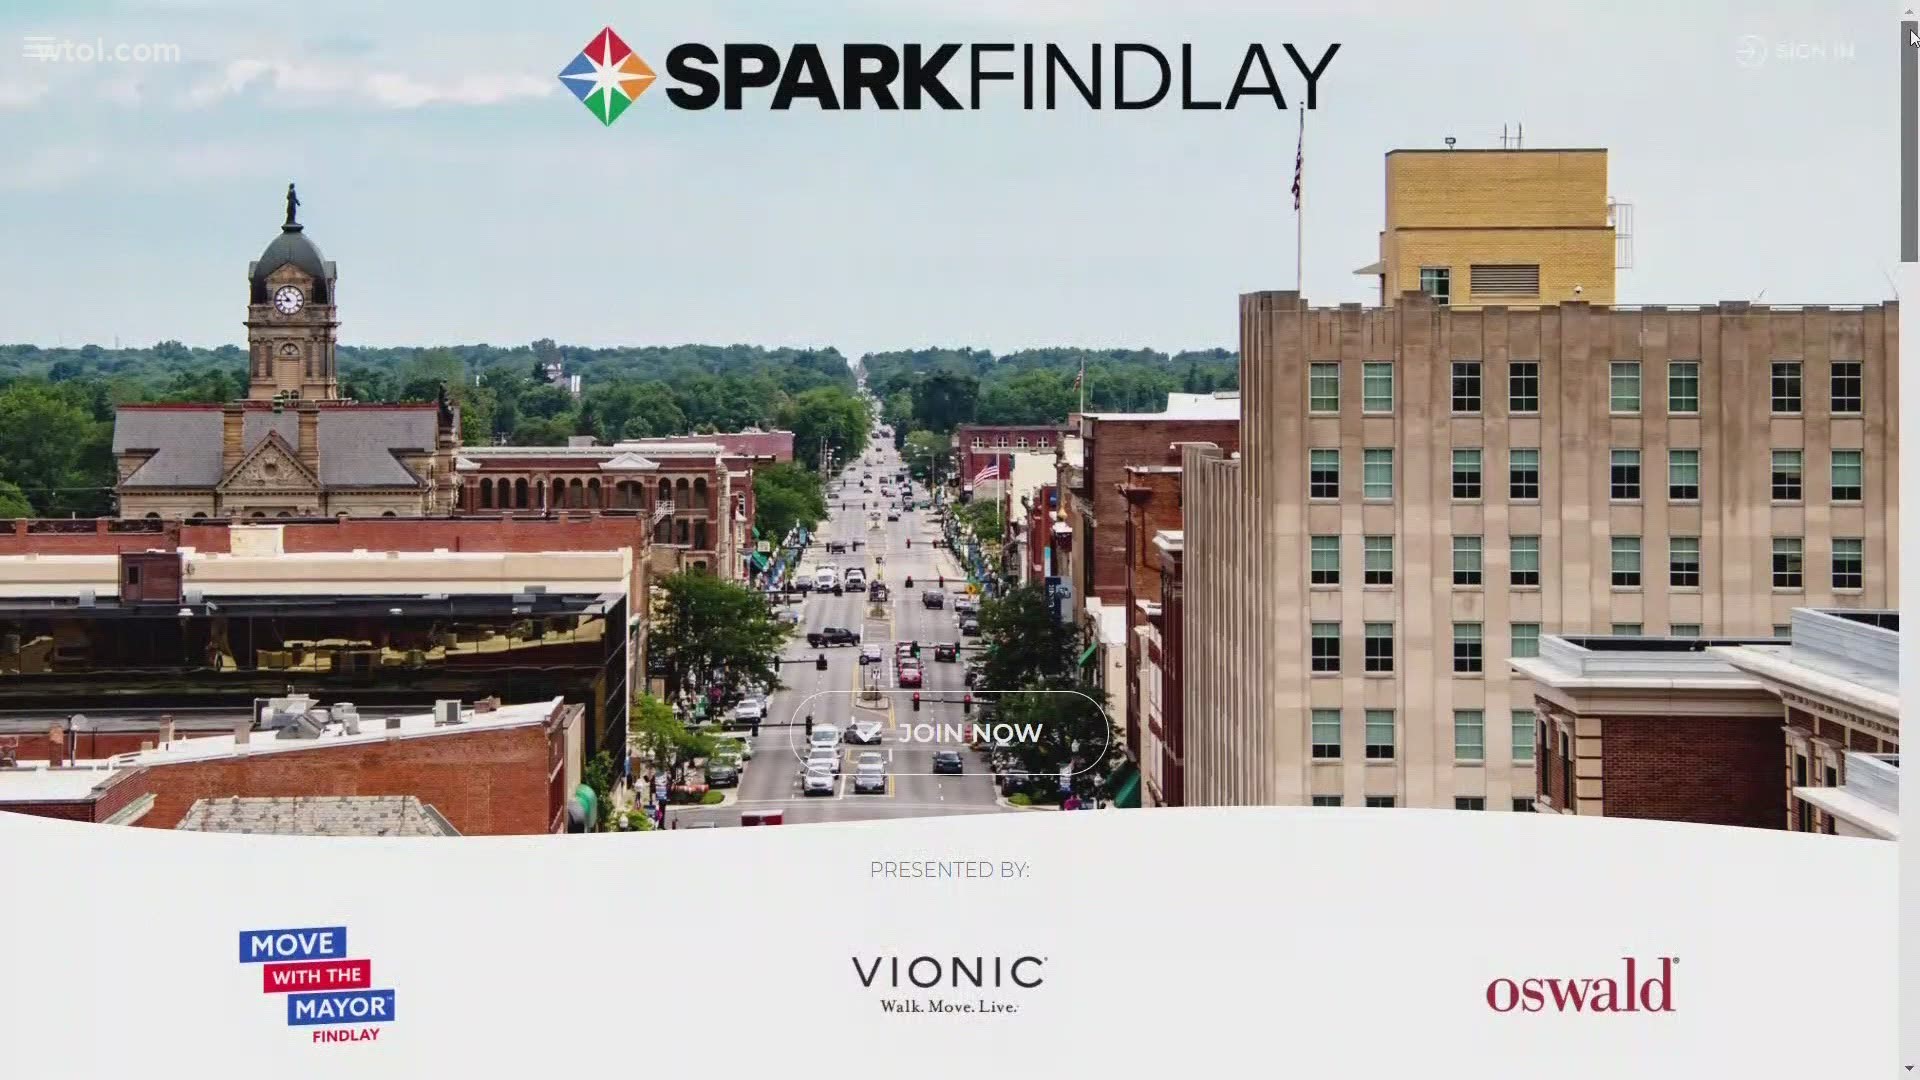 Spark Findlay is a new initiative to inspire more people to get out and get active.